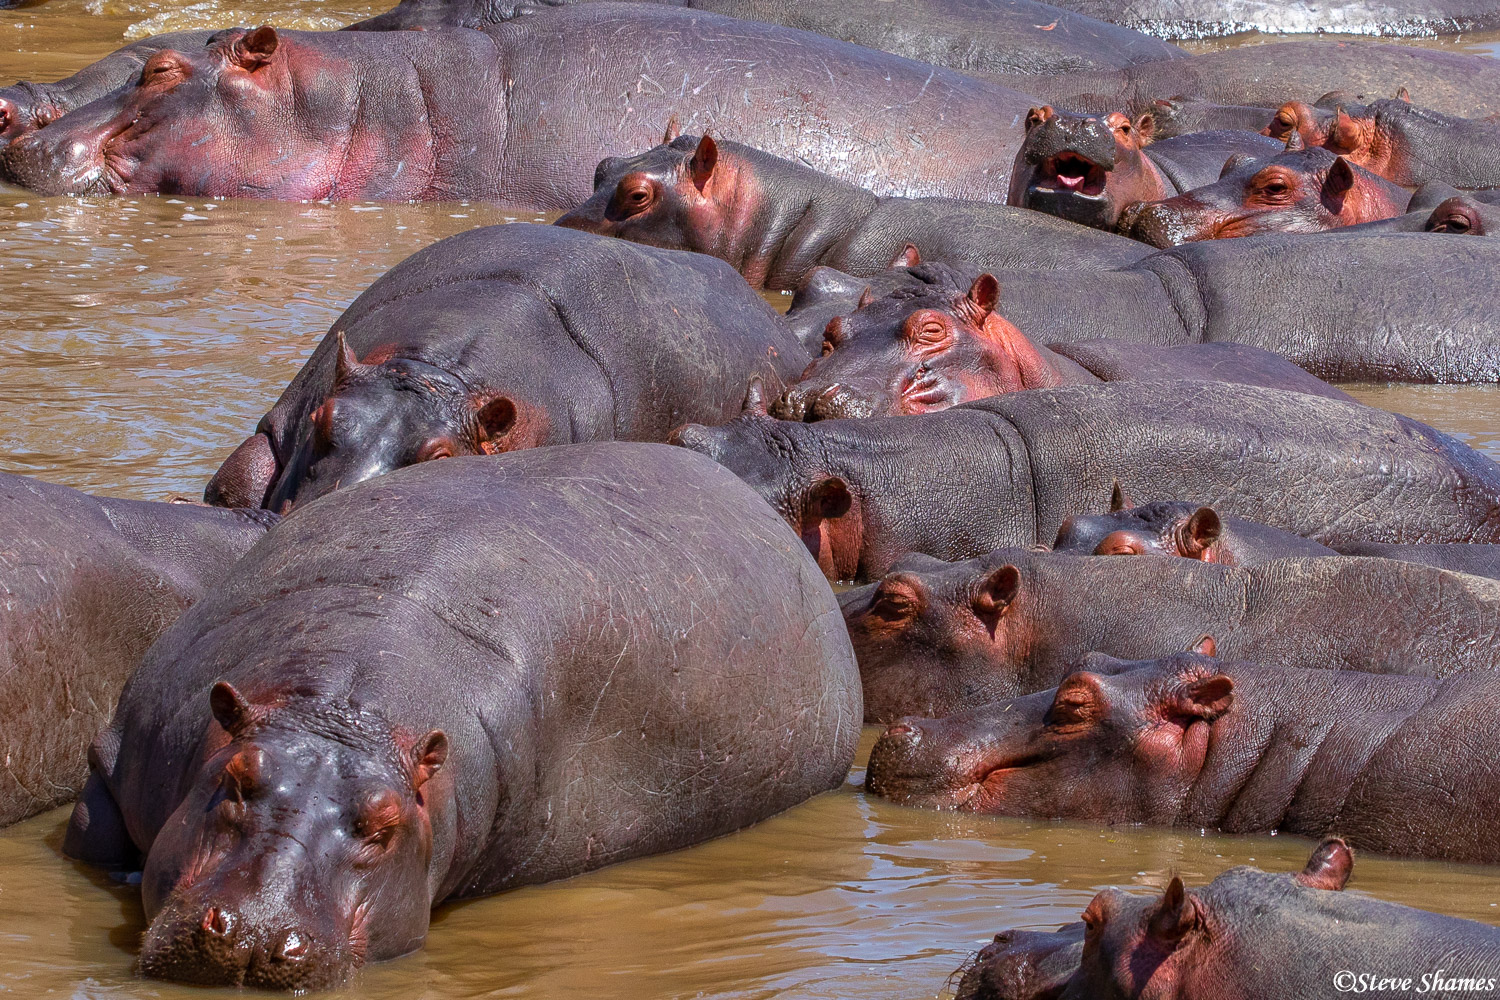 A group of hippos, also known as a pod of hippos.